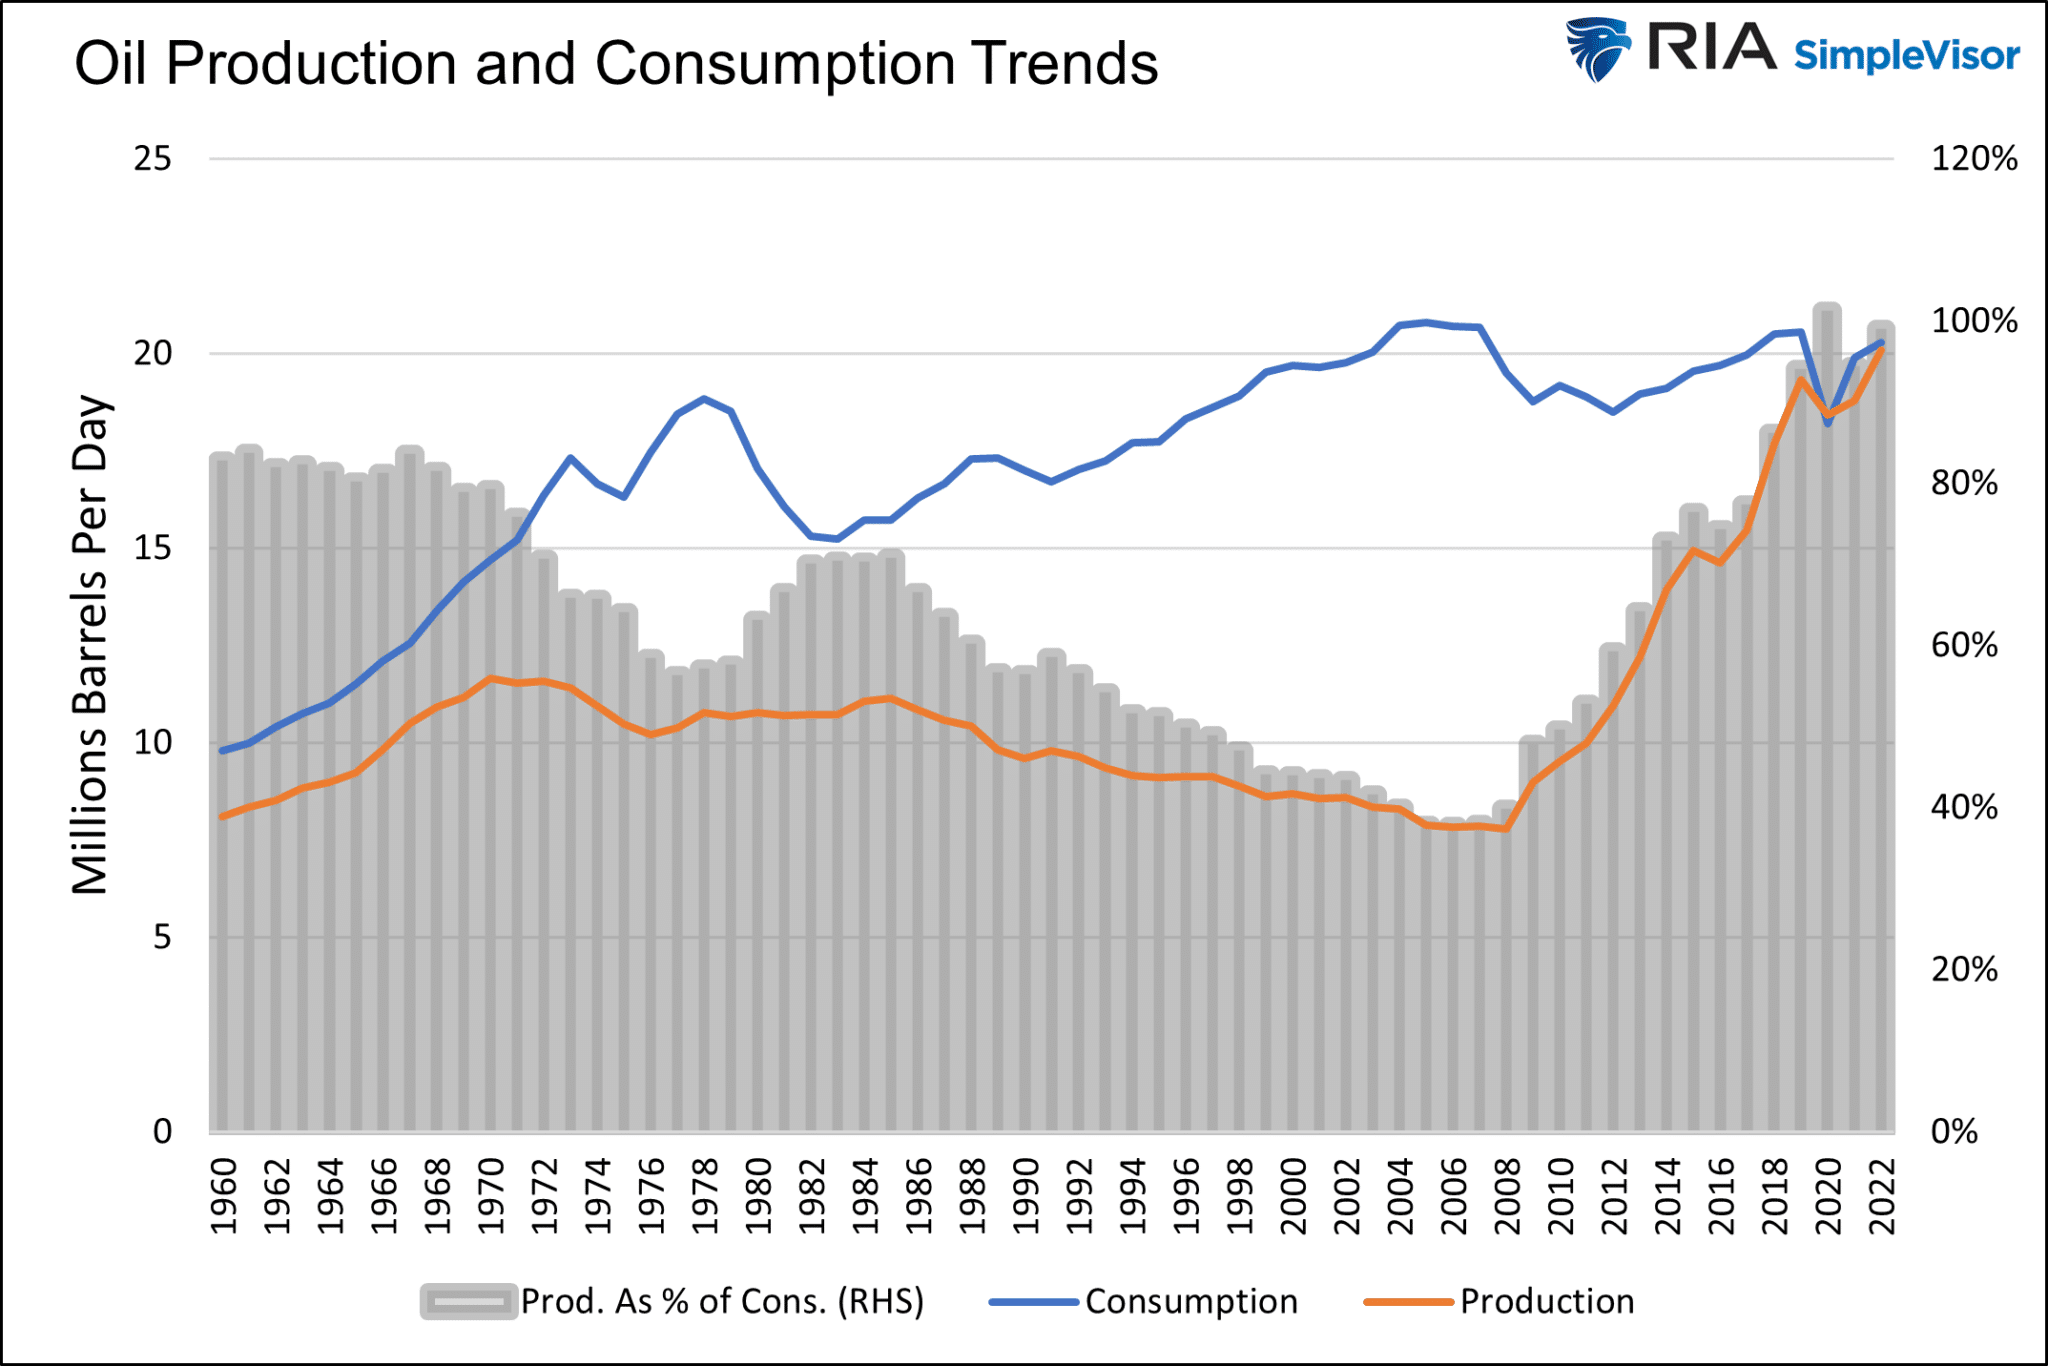 Oil Production and Consumption Trends